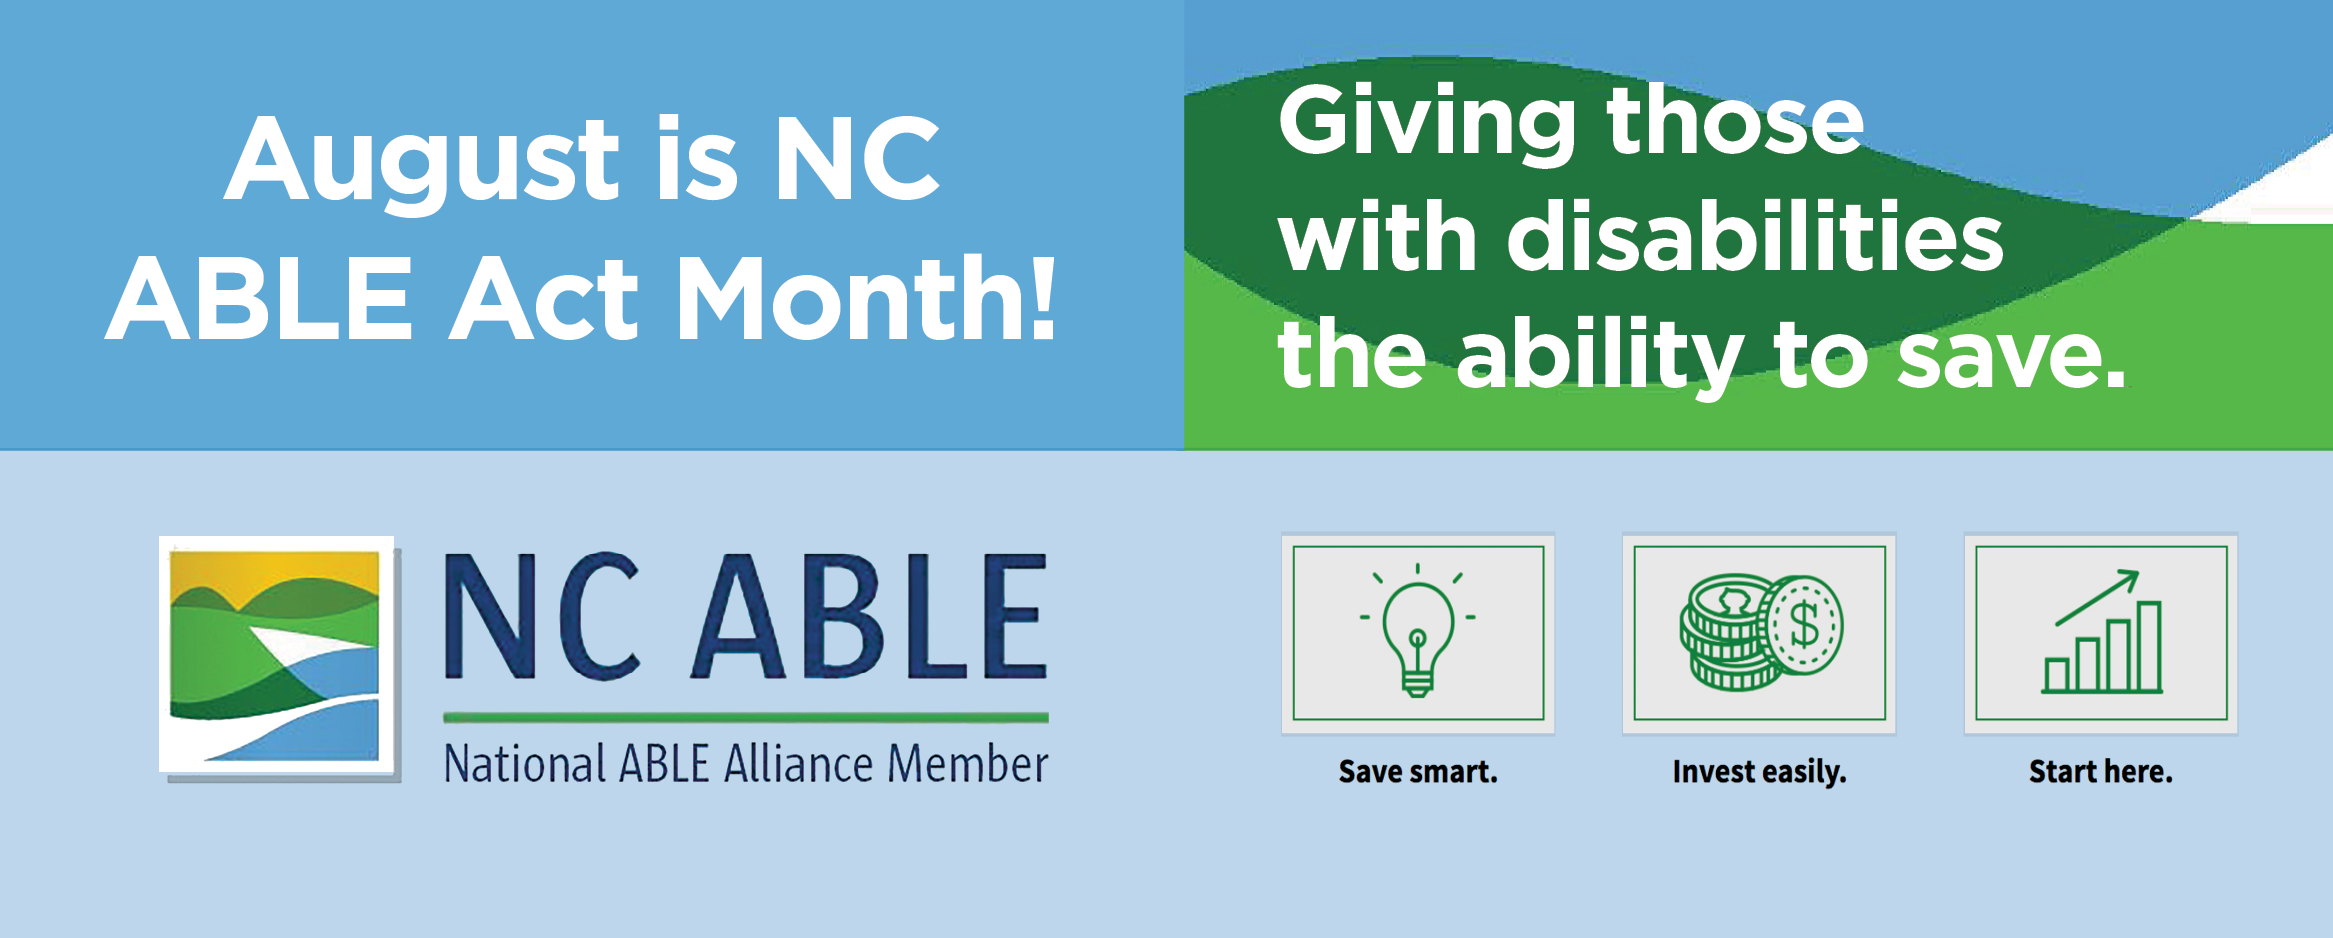 August is NC ABLE Act Month!